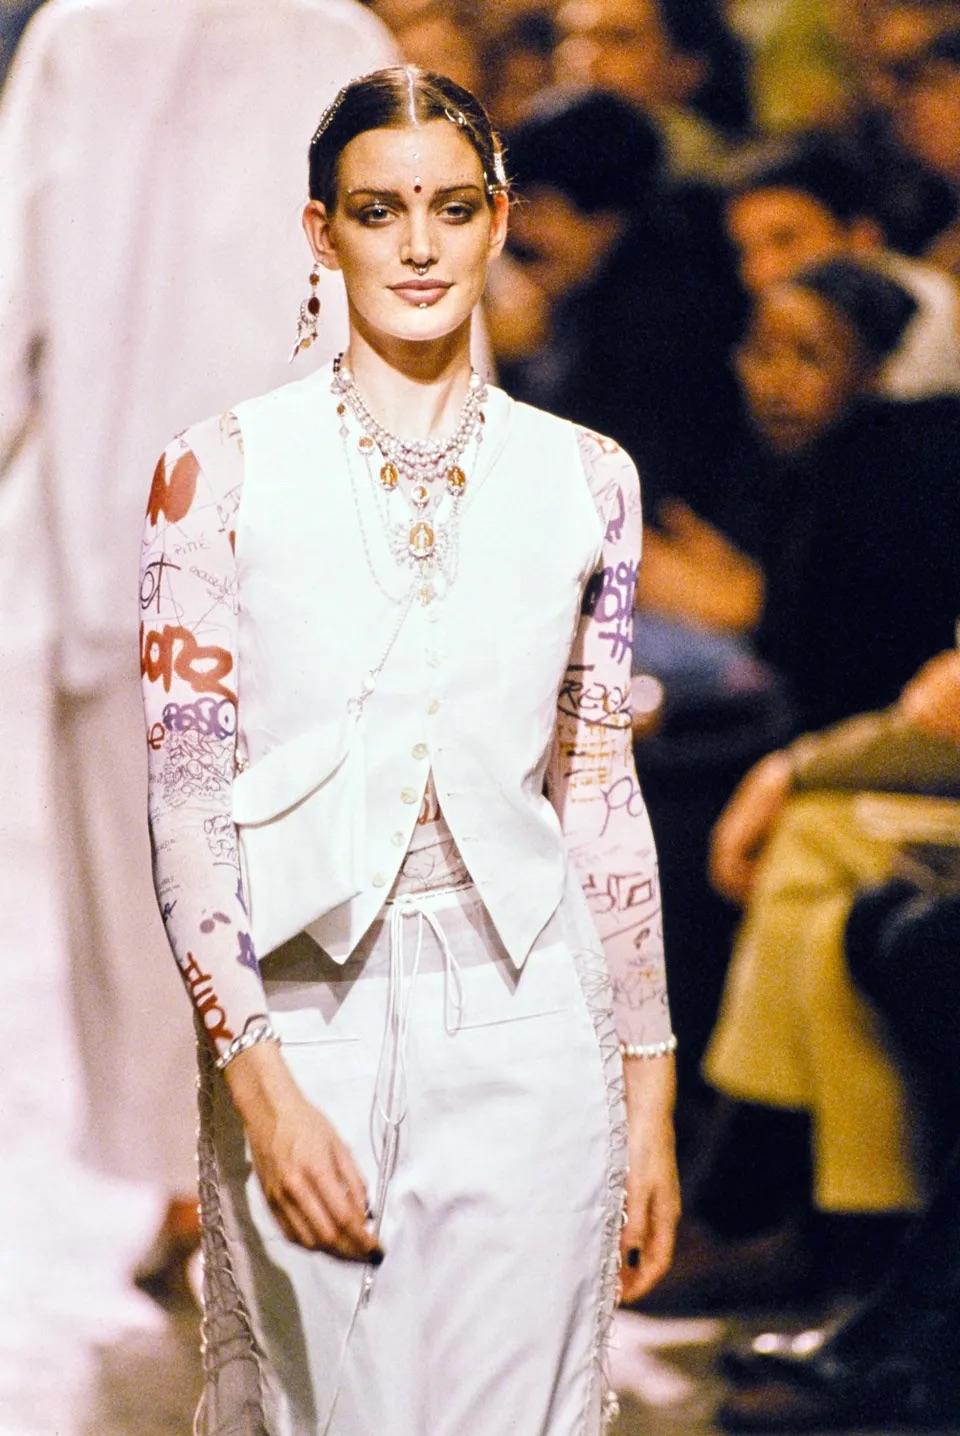 Jean-Paul Gaultier mesh long sleeves top and matching mesh long wrap skirt from Spring Summer 1994 “Les Tatouages” collection as seen on the runway. Both pieces have a graffiti colourful print all over. Top is embellished with studs on the neckline